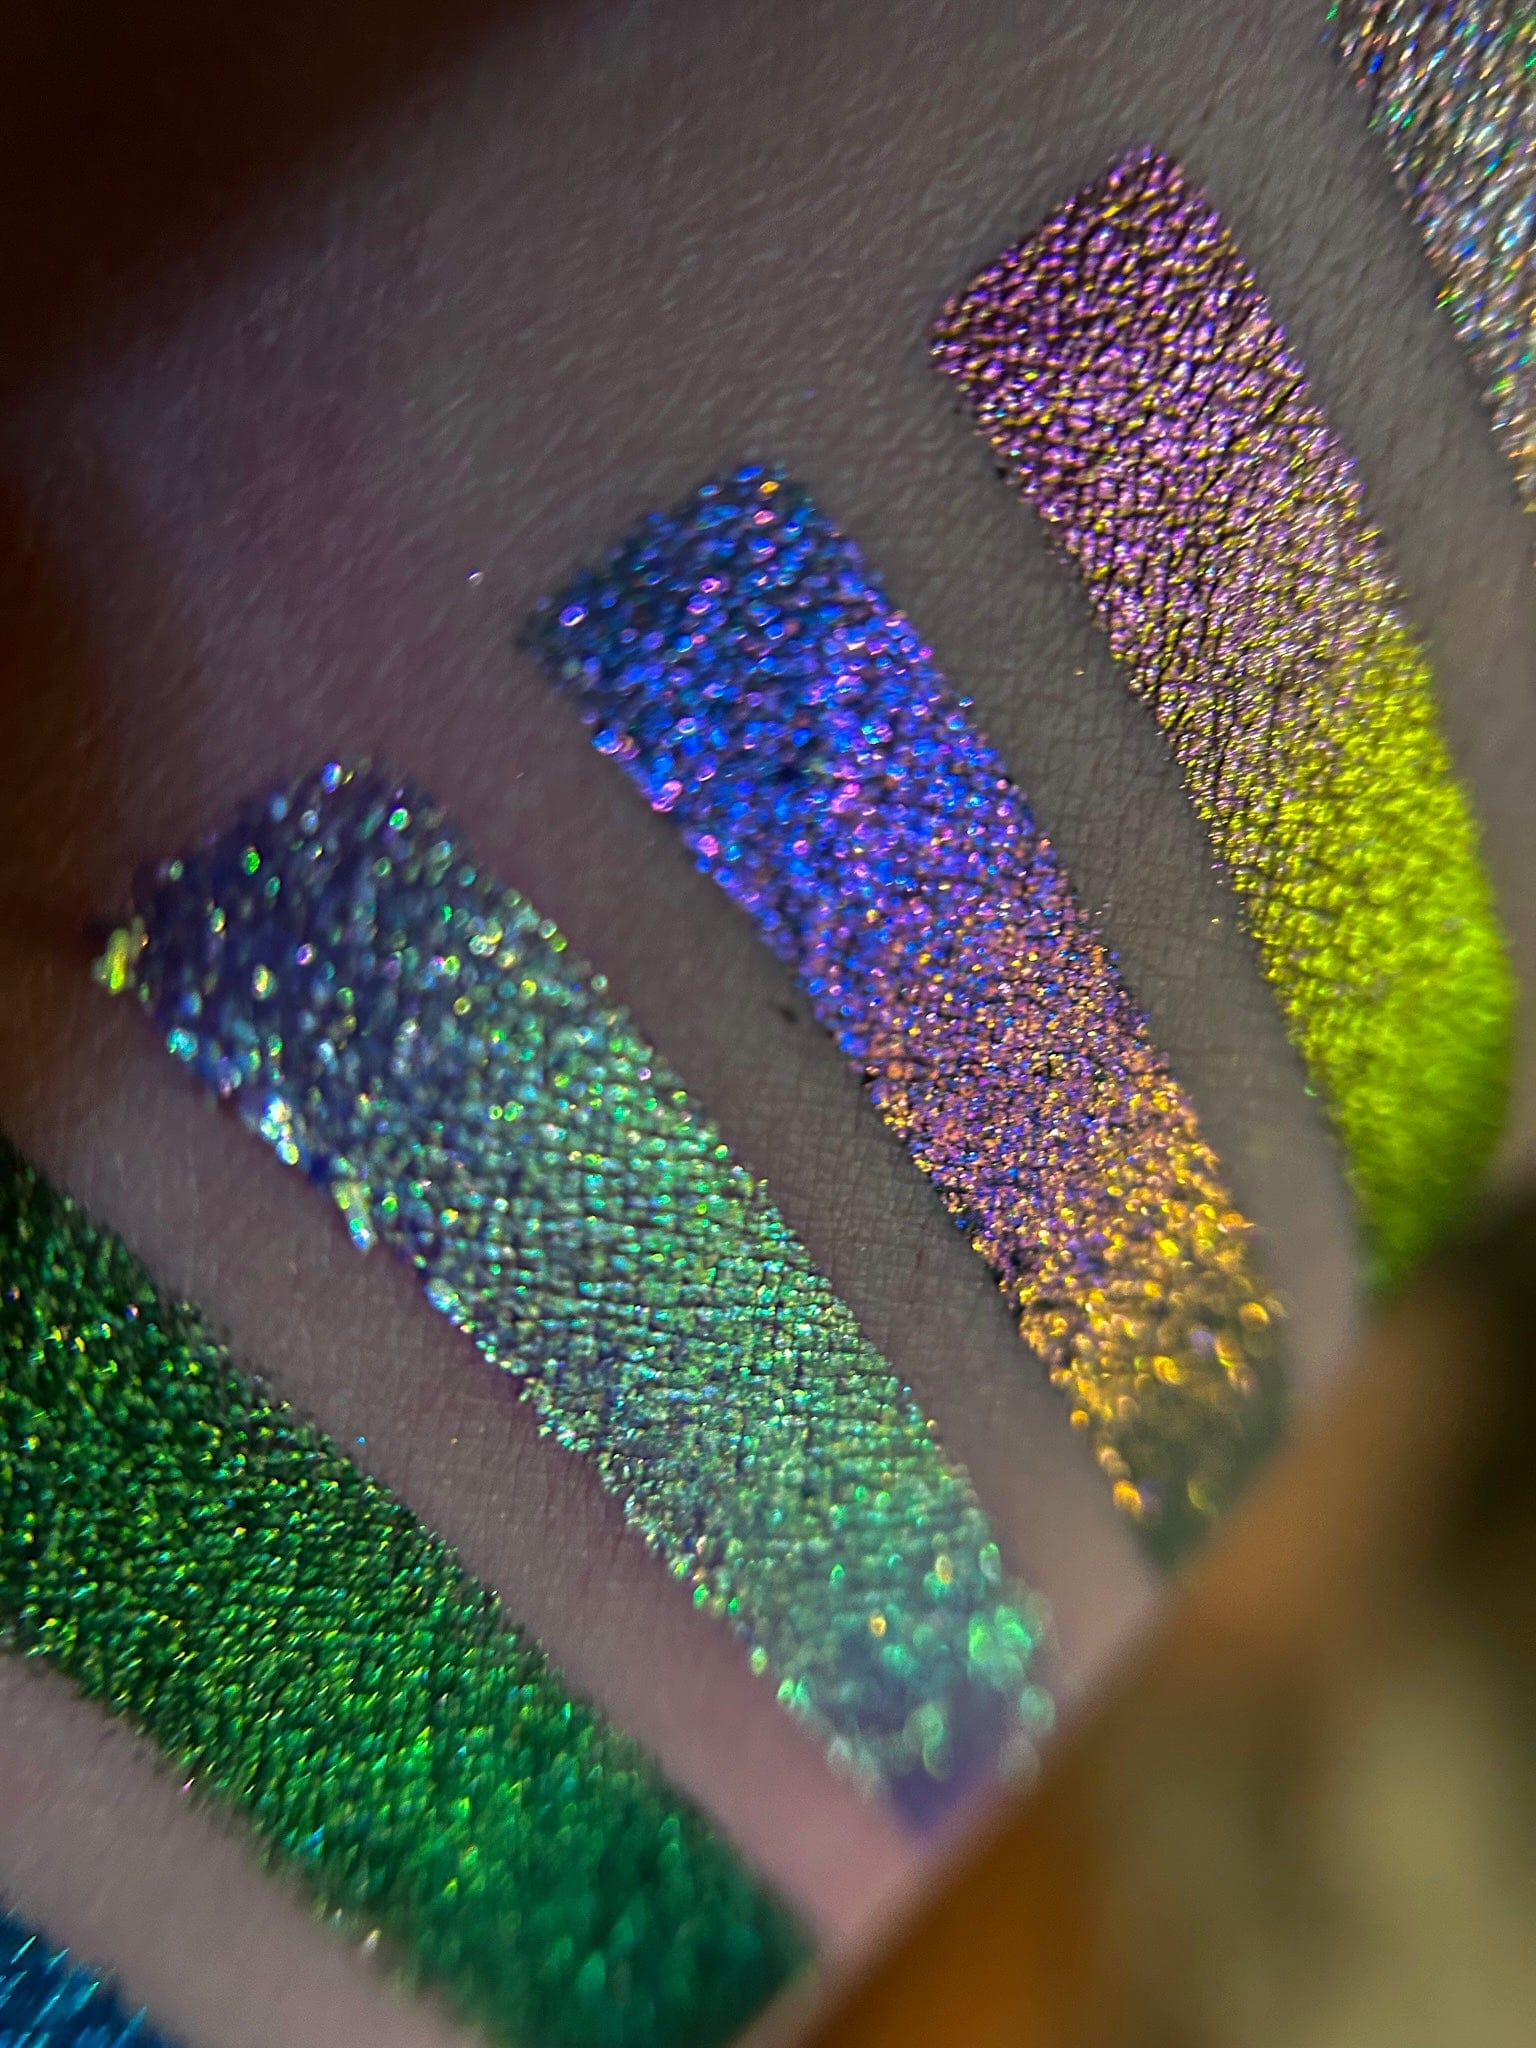 "Limited Edition Multi-Chrome Pressed Pigment Eyeshadows - Create Out of This World Looks Today!"